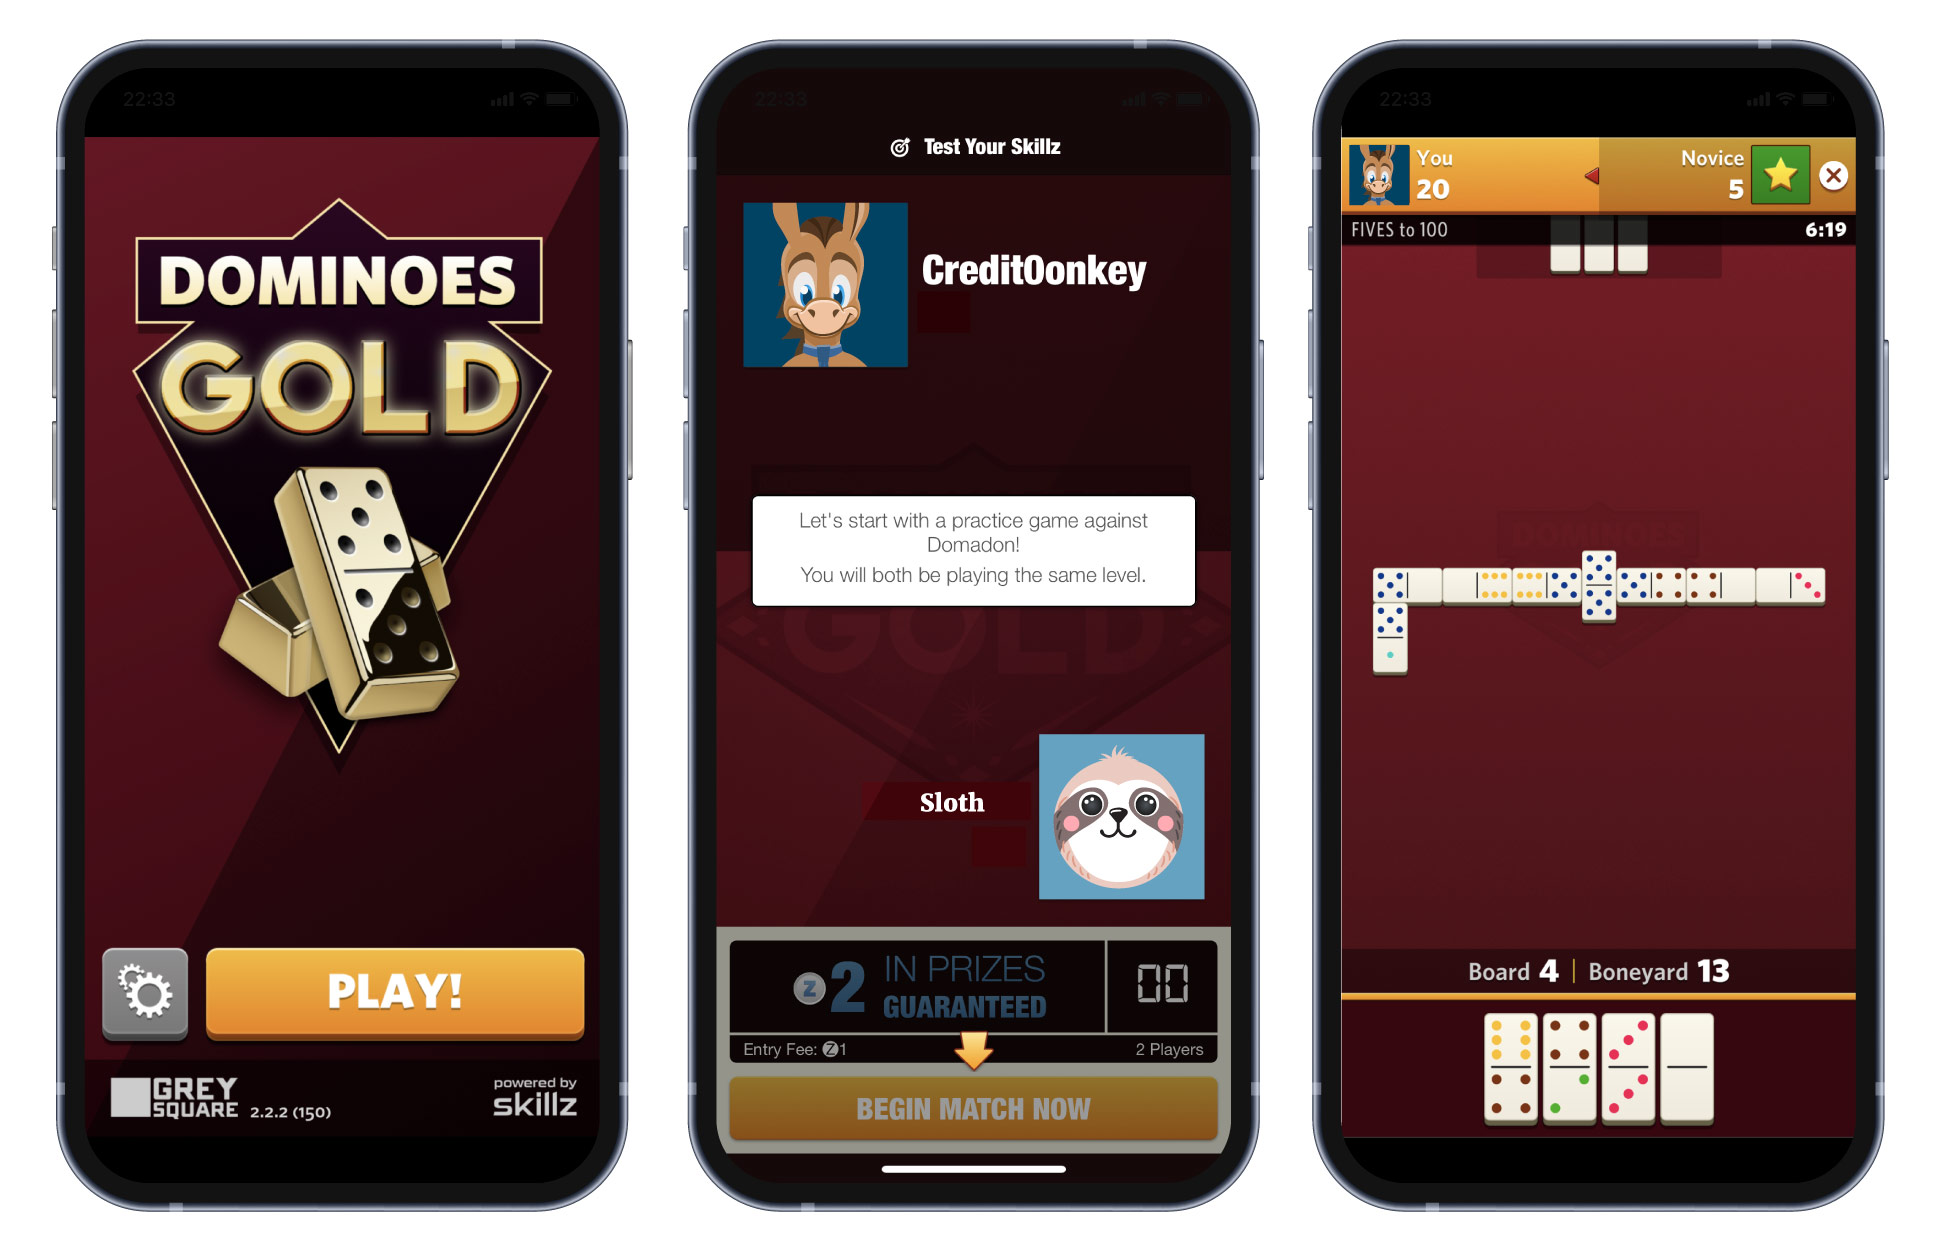 15 Legit Cash Games and Reward Apps That Pay Real Money